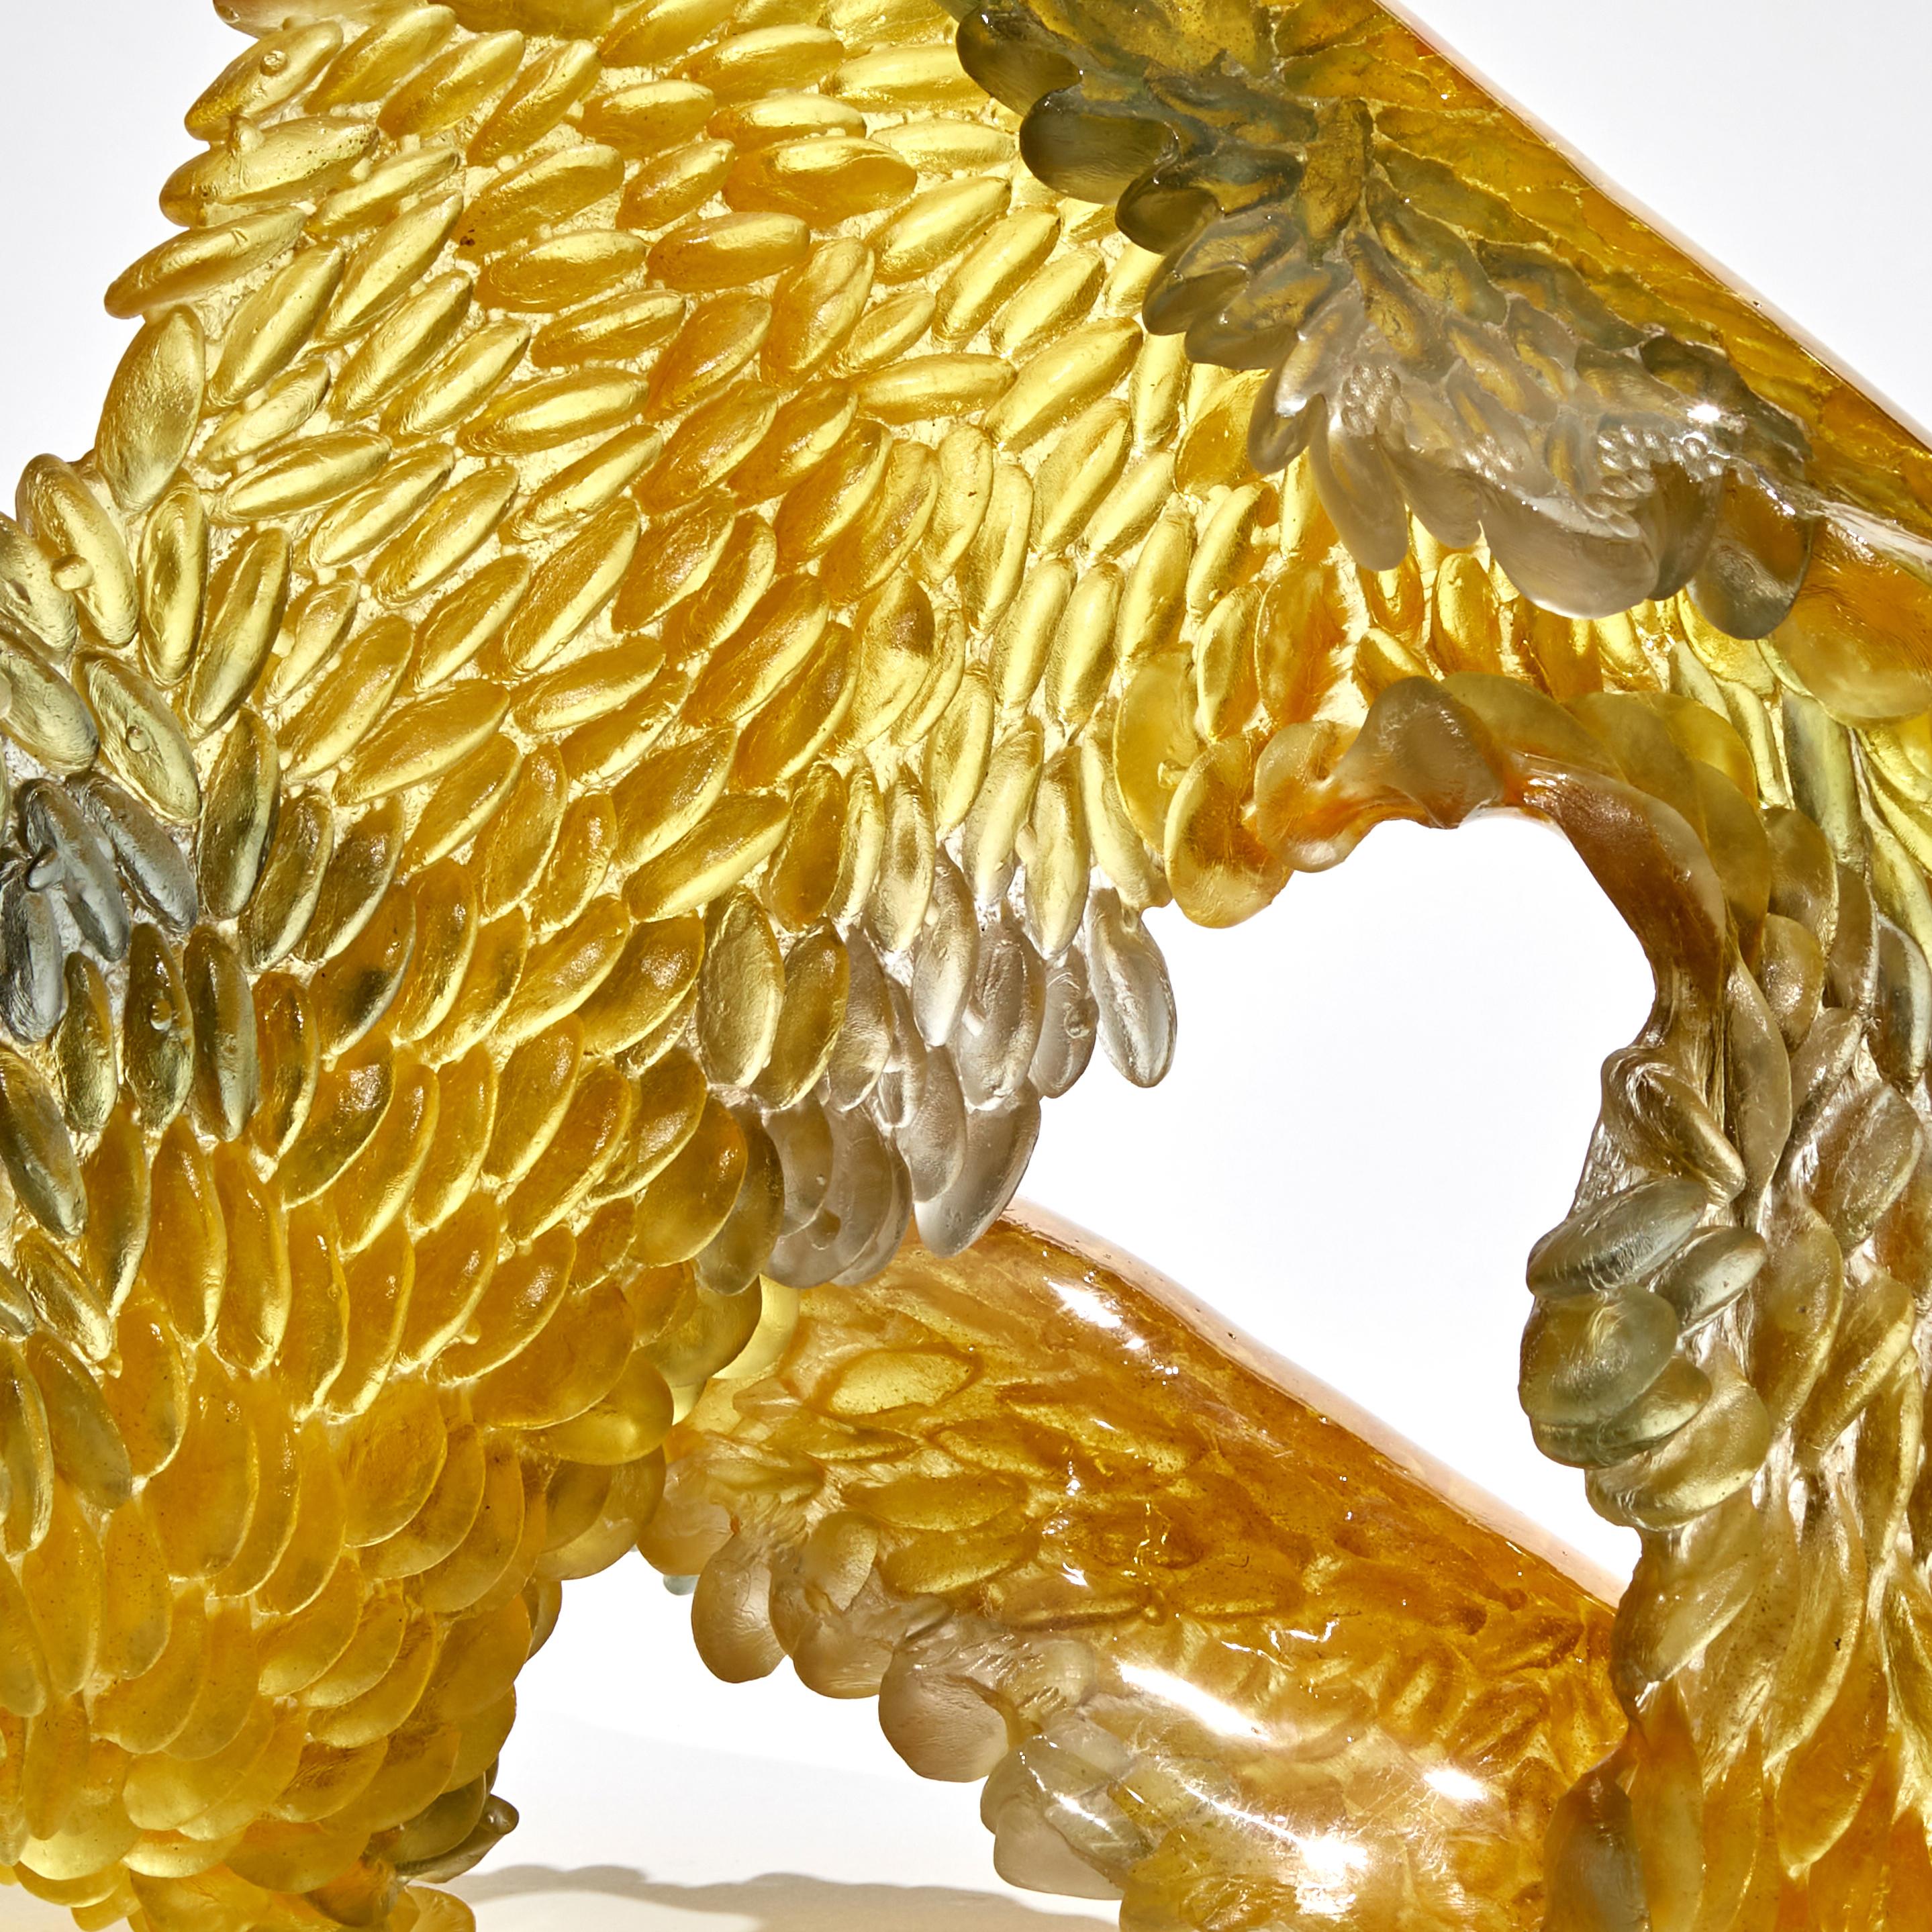 British Infinity, a Unique Glass Sculpture in Amber, Gold & Grey by Nina Casson McGarva